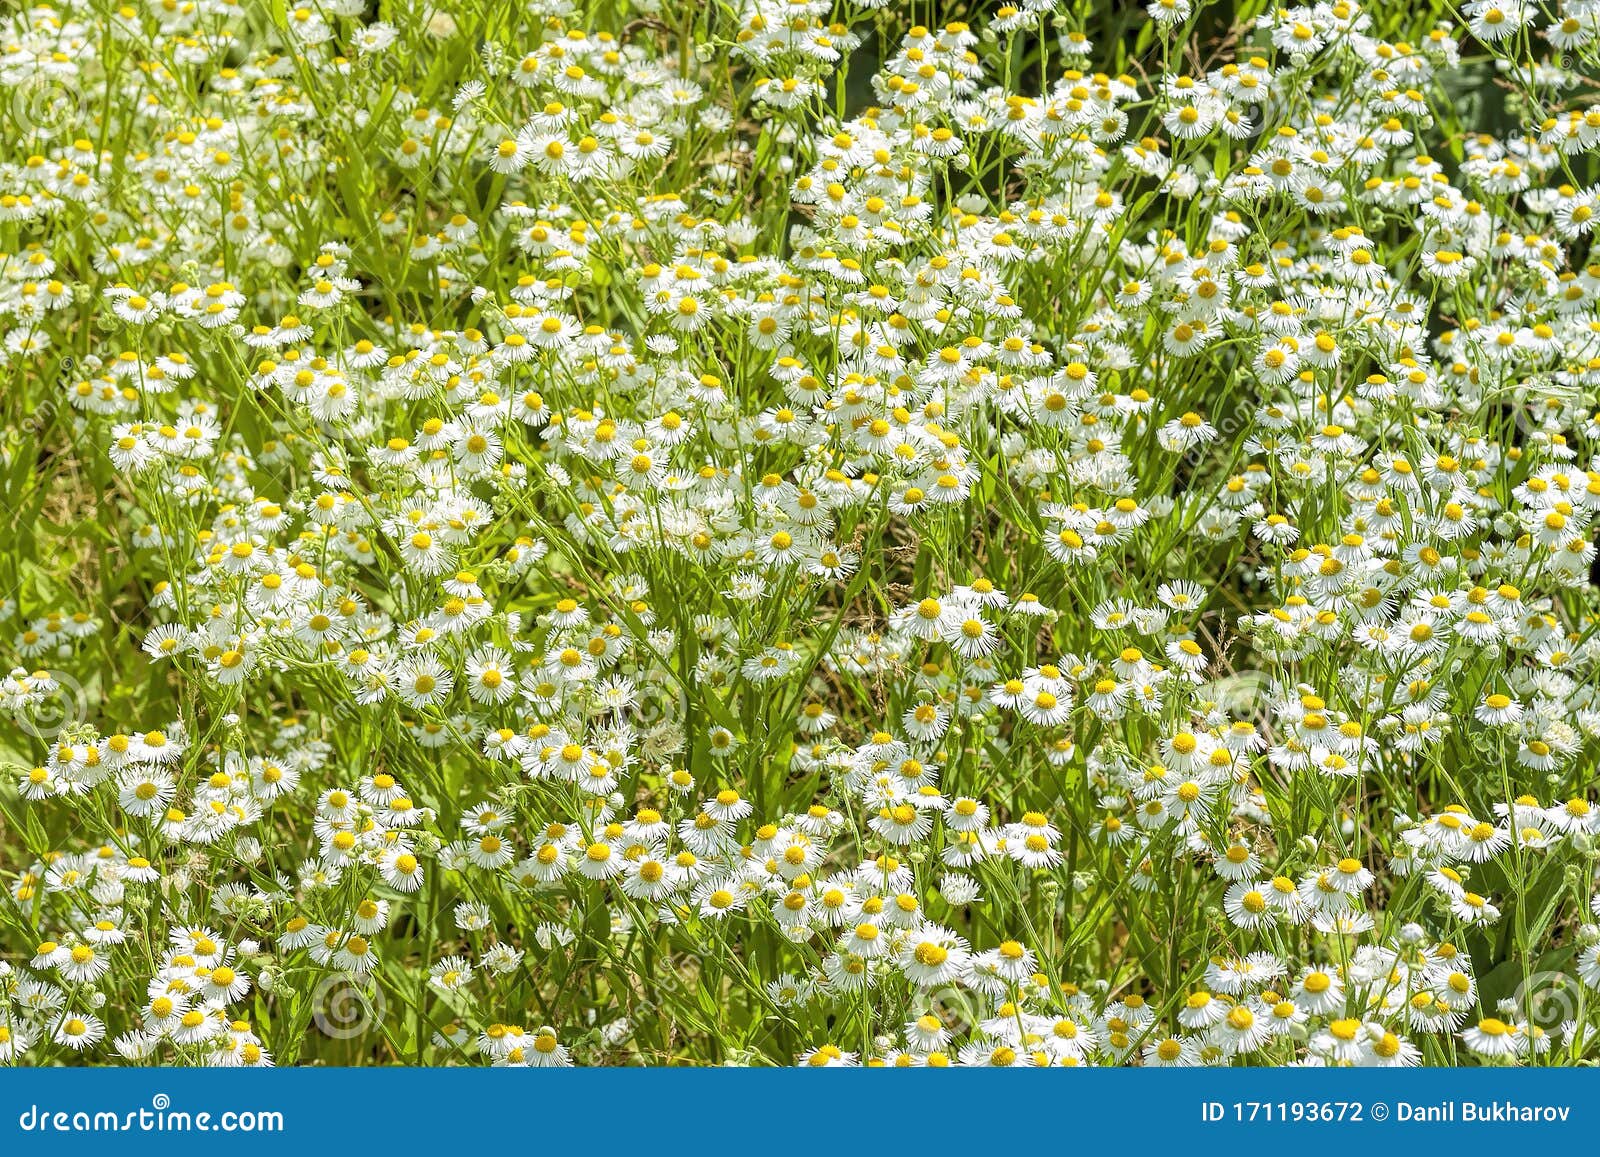 Field Of Camomile Daisy Flowers Stock Photo Image Of White Yellow